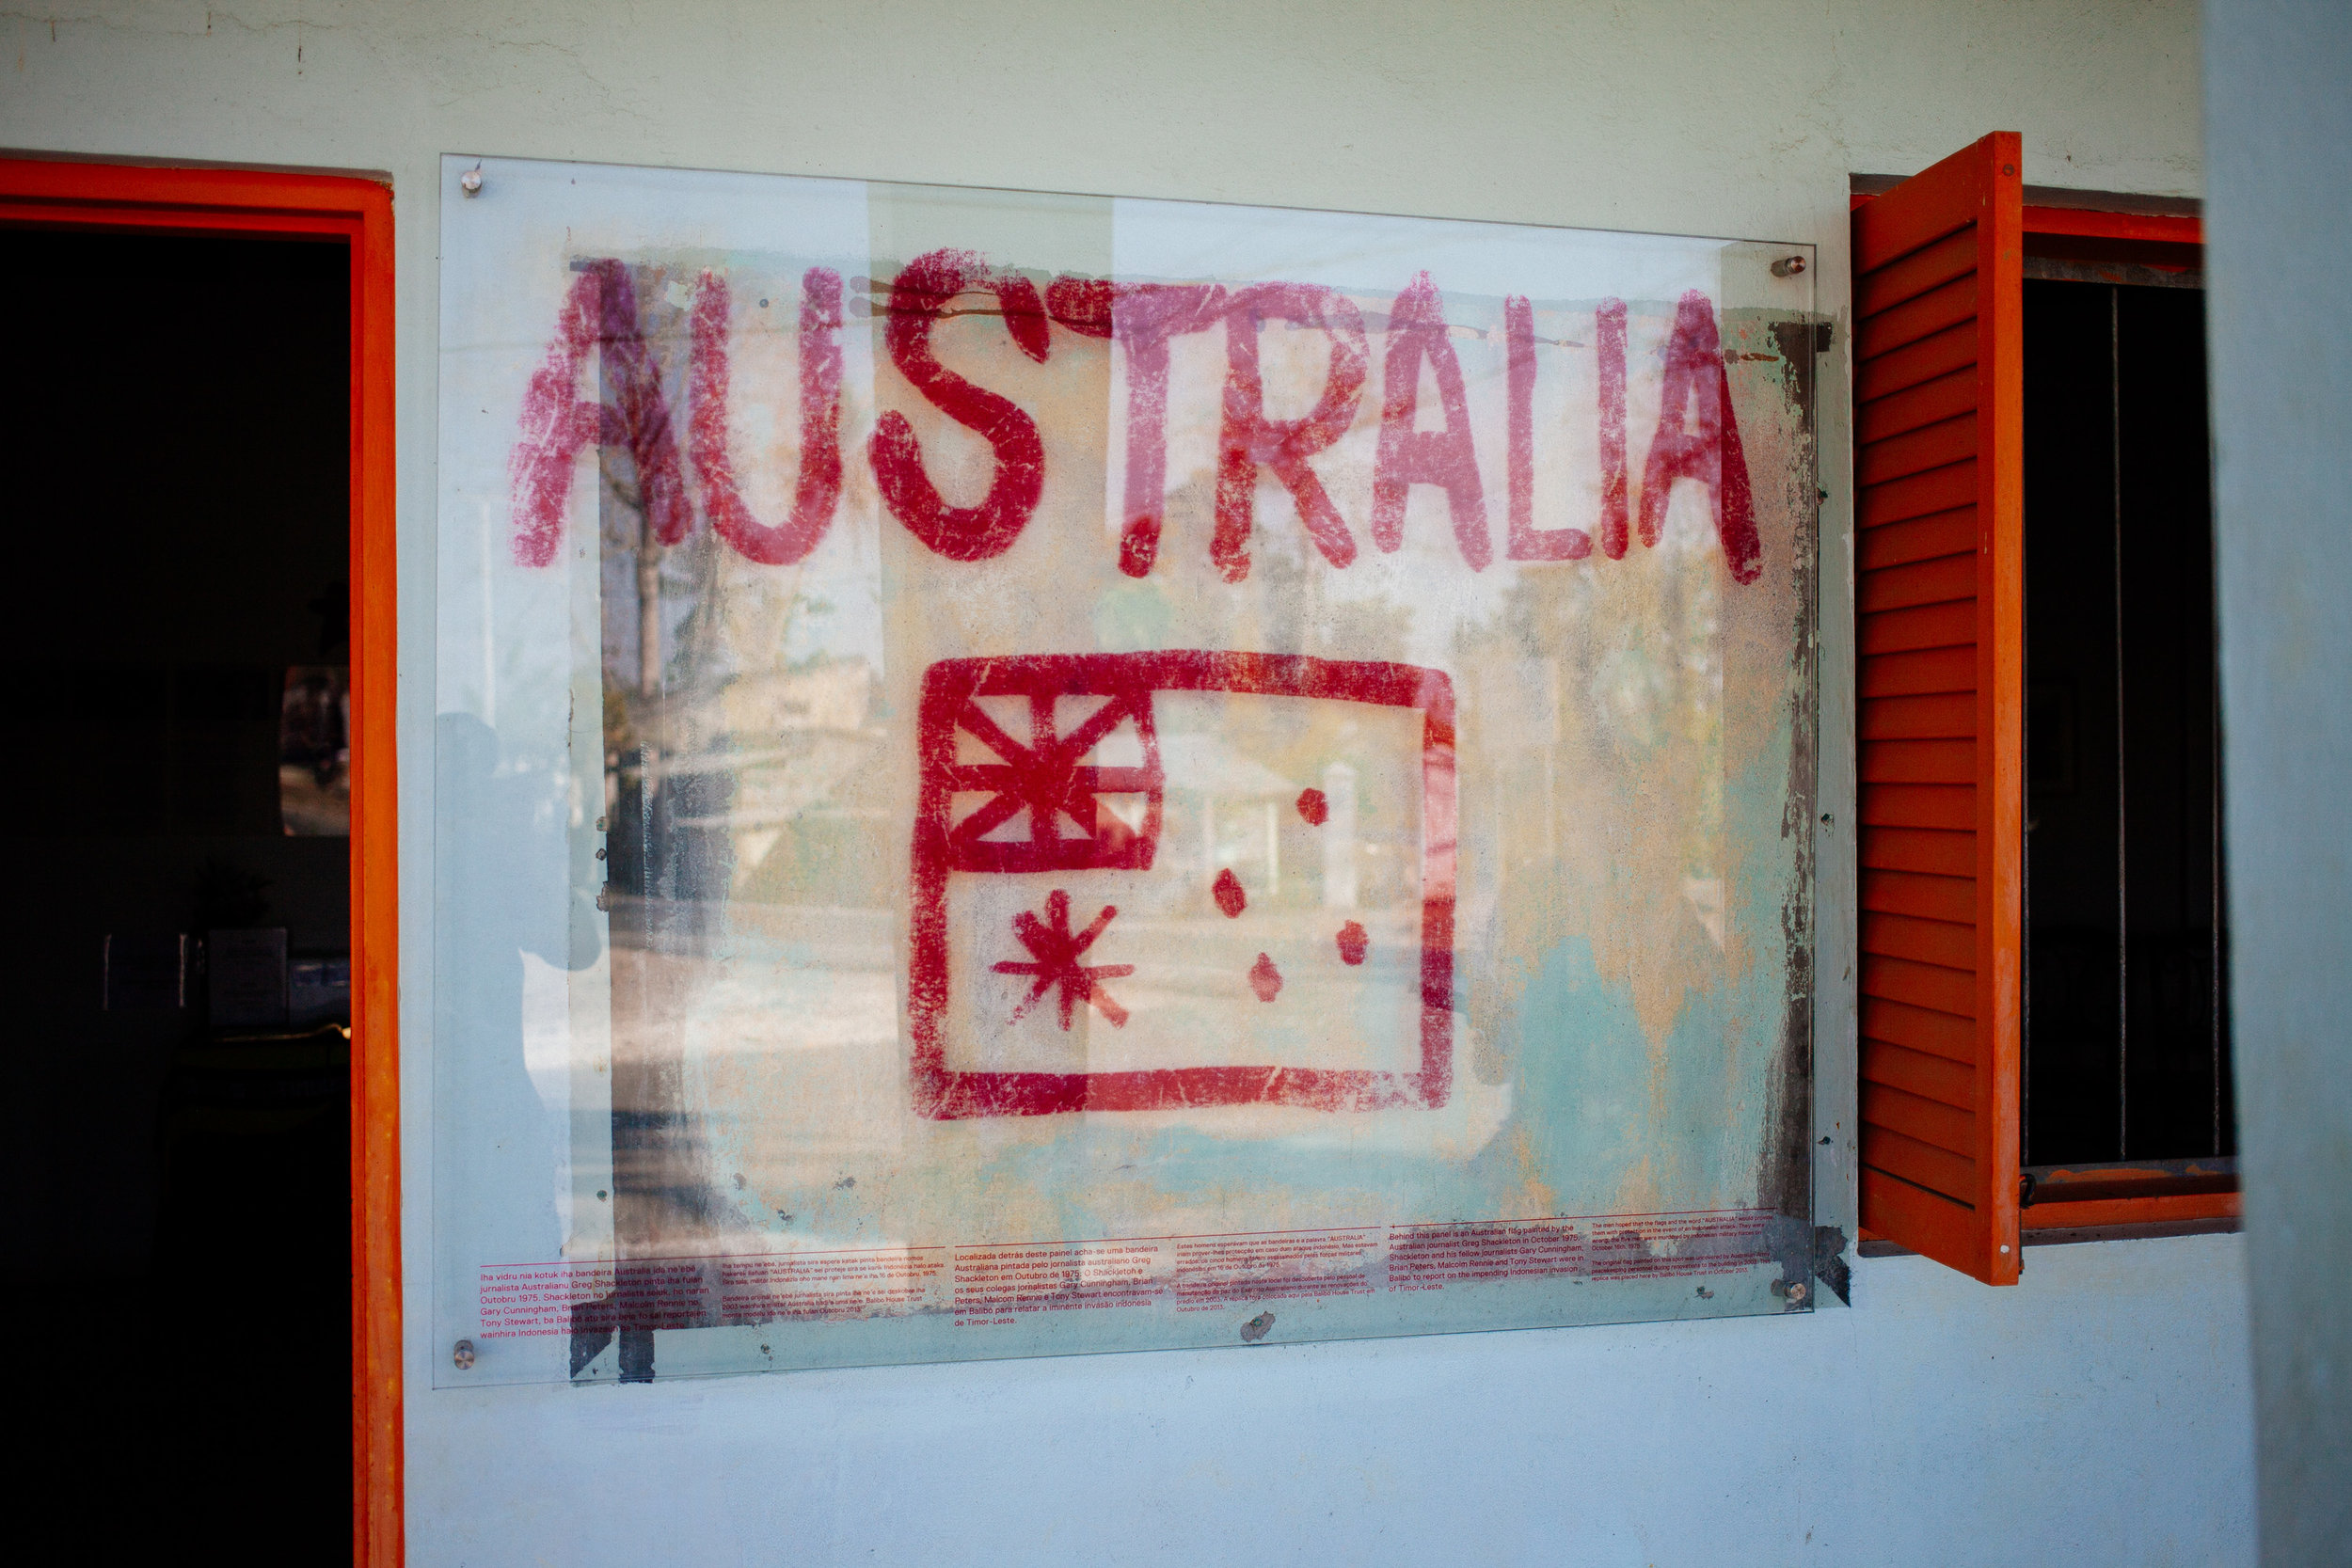  This is the original Australian flag painted on the Balibo Hilton by the Balibo 5 